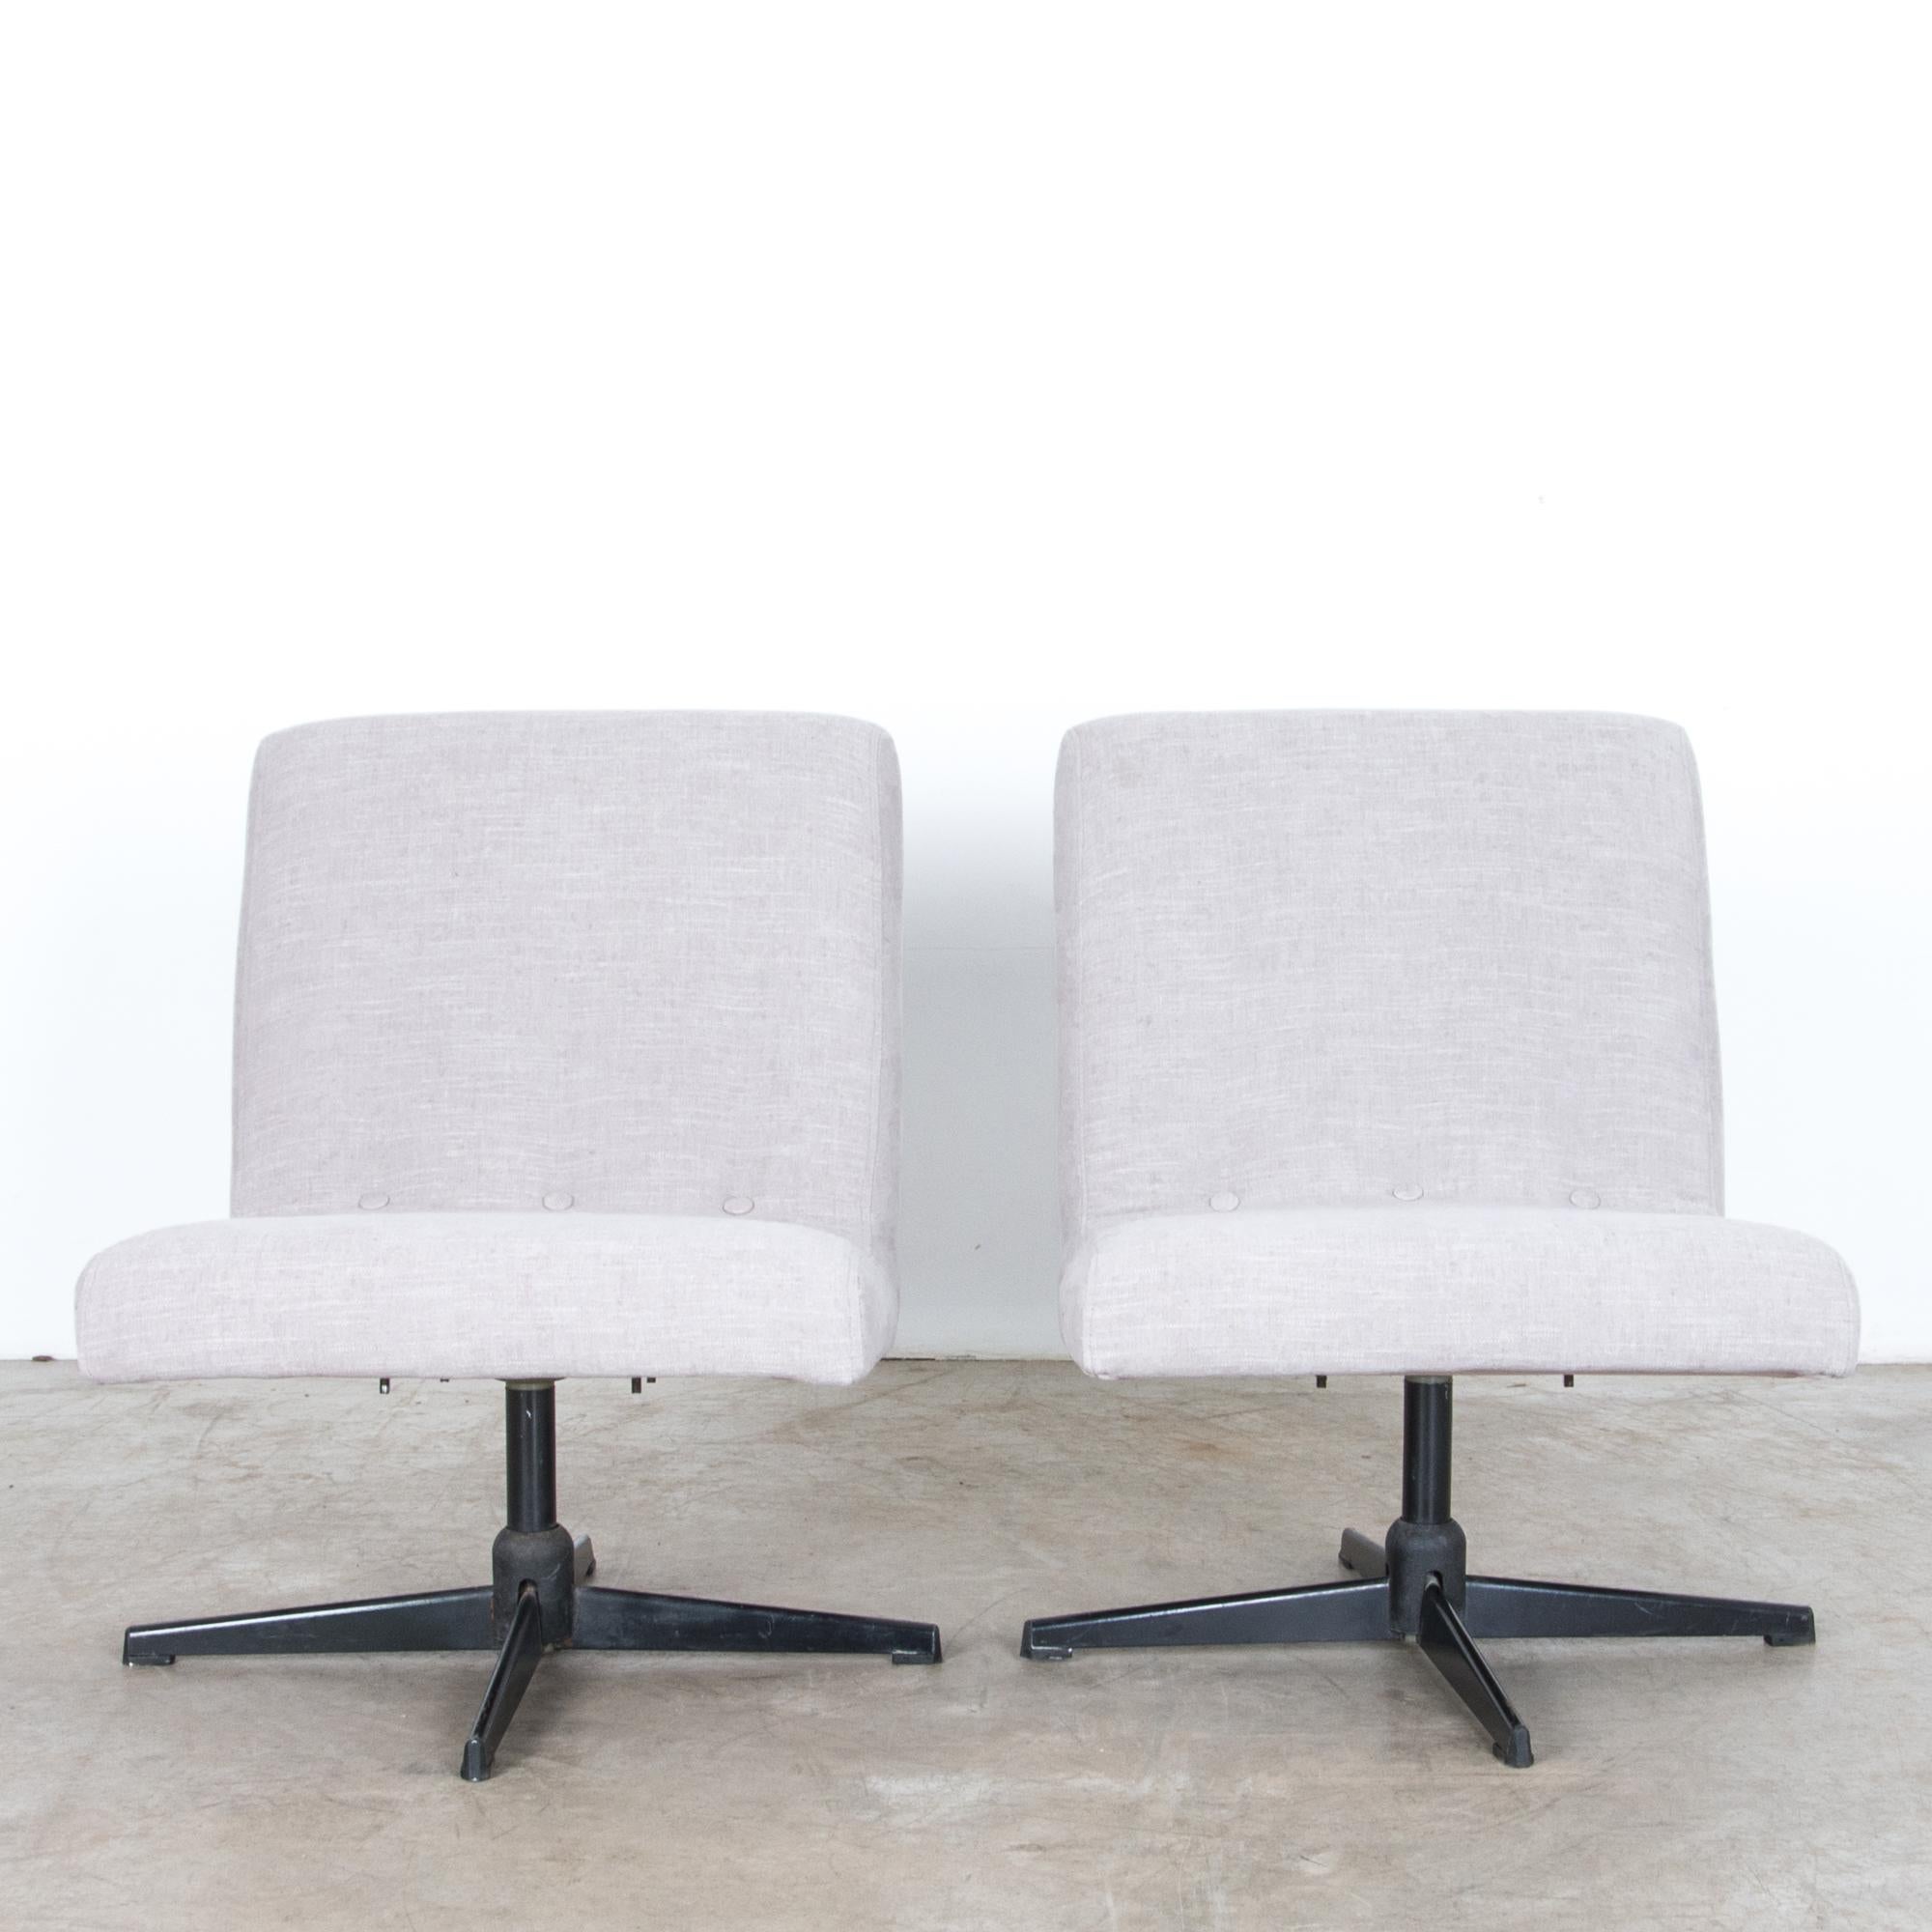 A pair of rotating metal chairs from Czech Republic, circa 1960. Re-dressed in a chic textured cool grey, this midcentury design looks fresh sporting distinctive geometric shape, with a subtle angle. Reclined for comfort, this sleek design elegantly